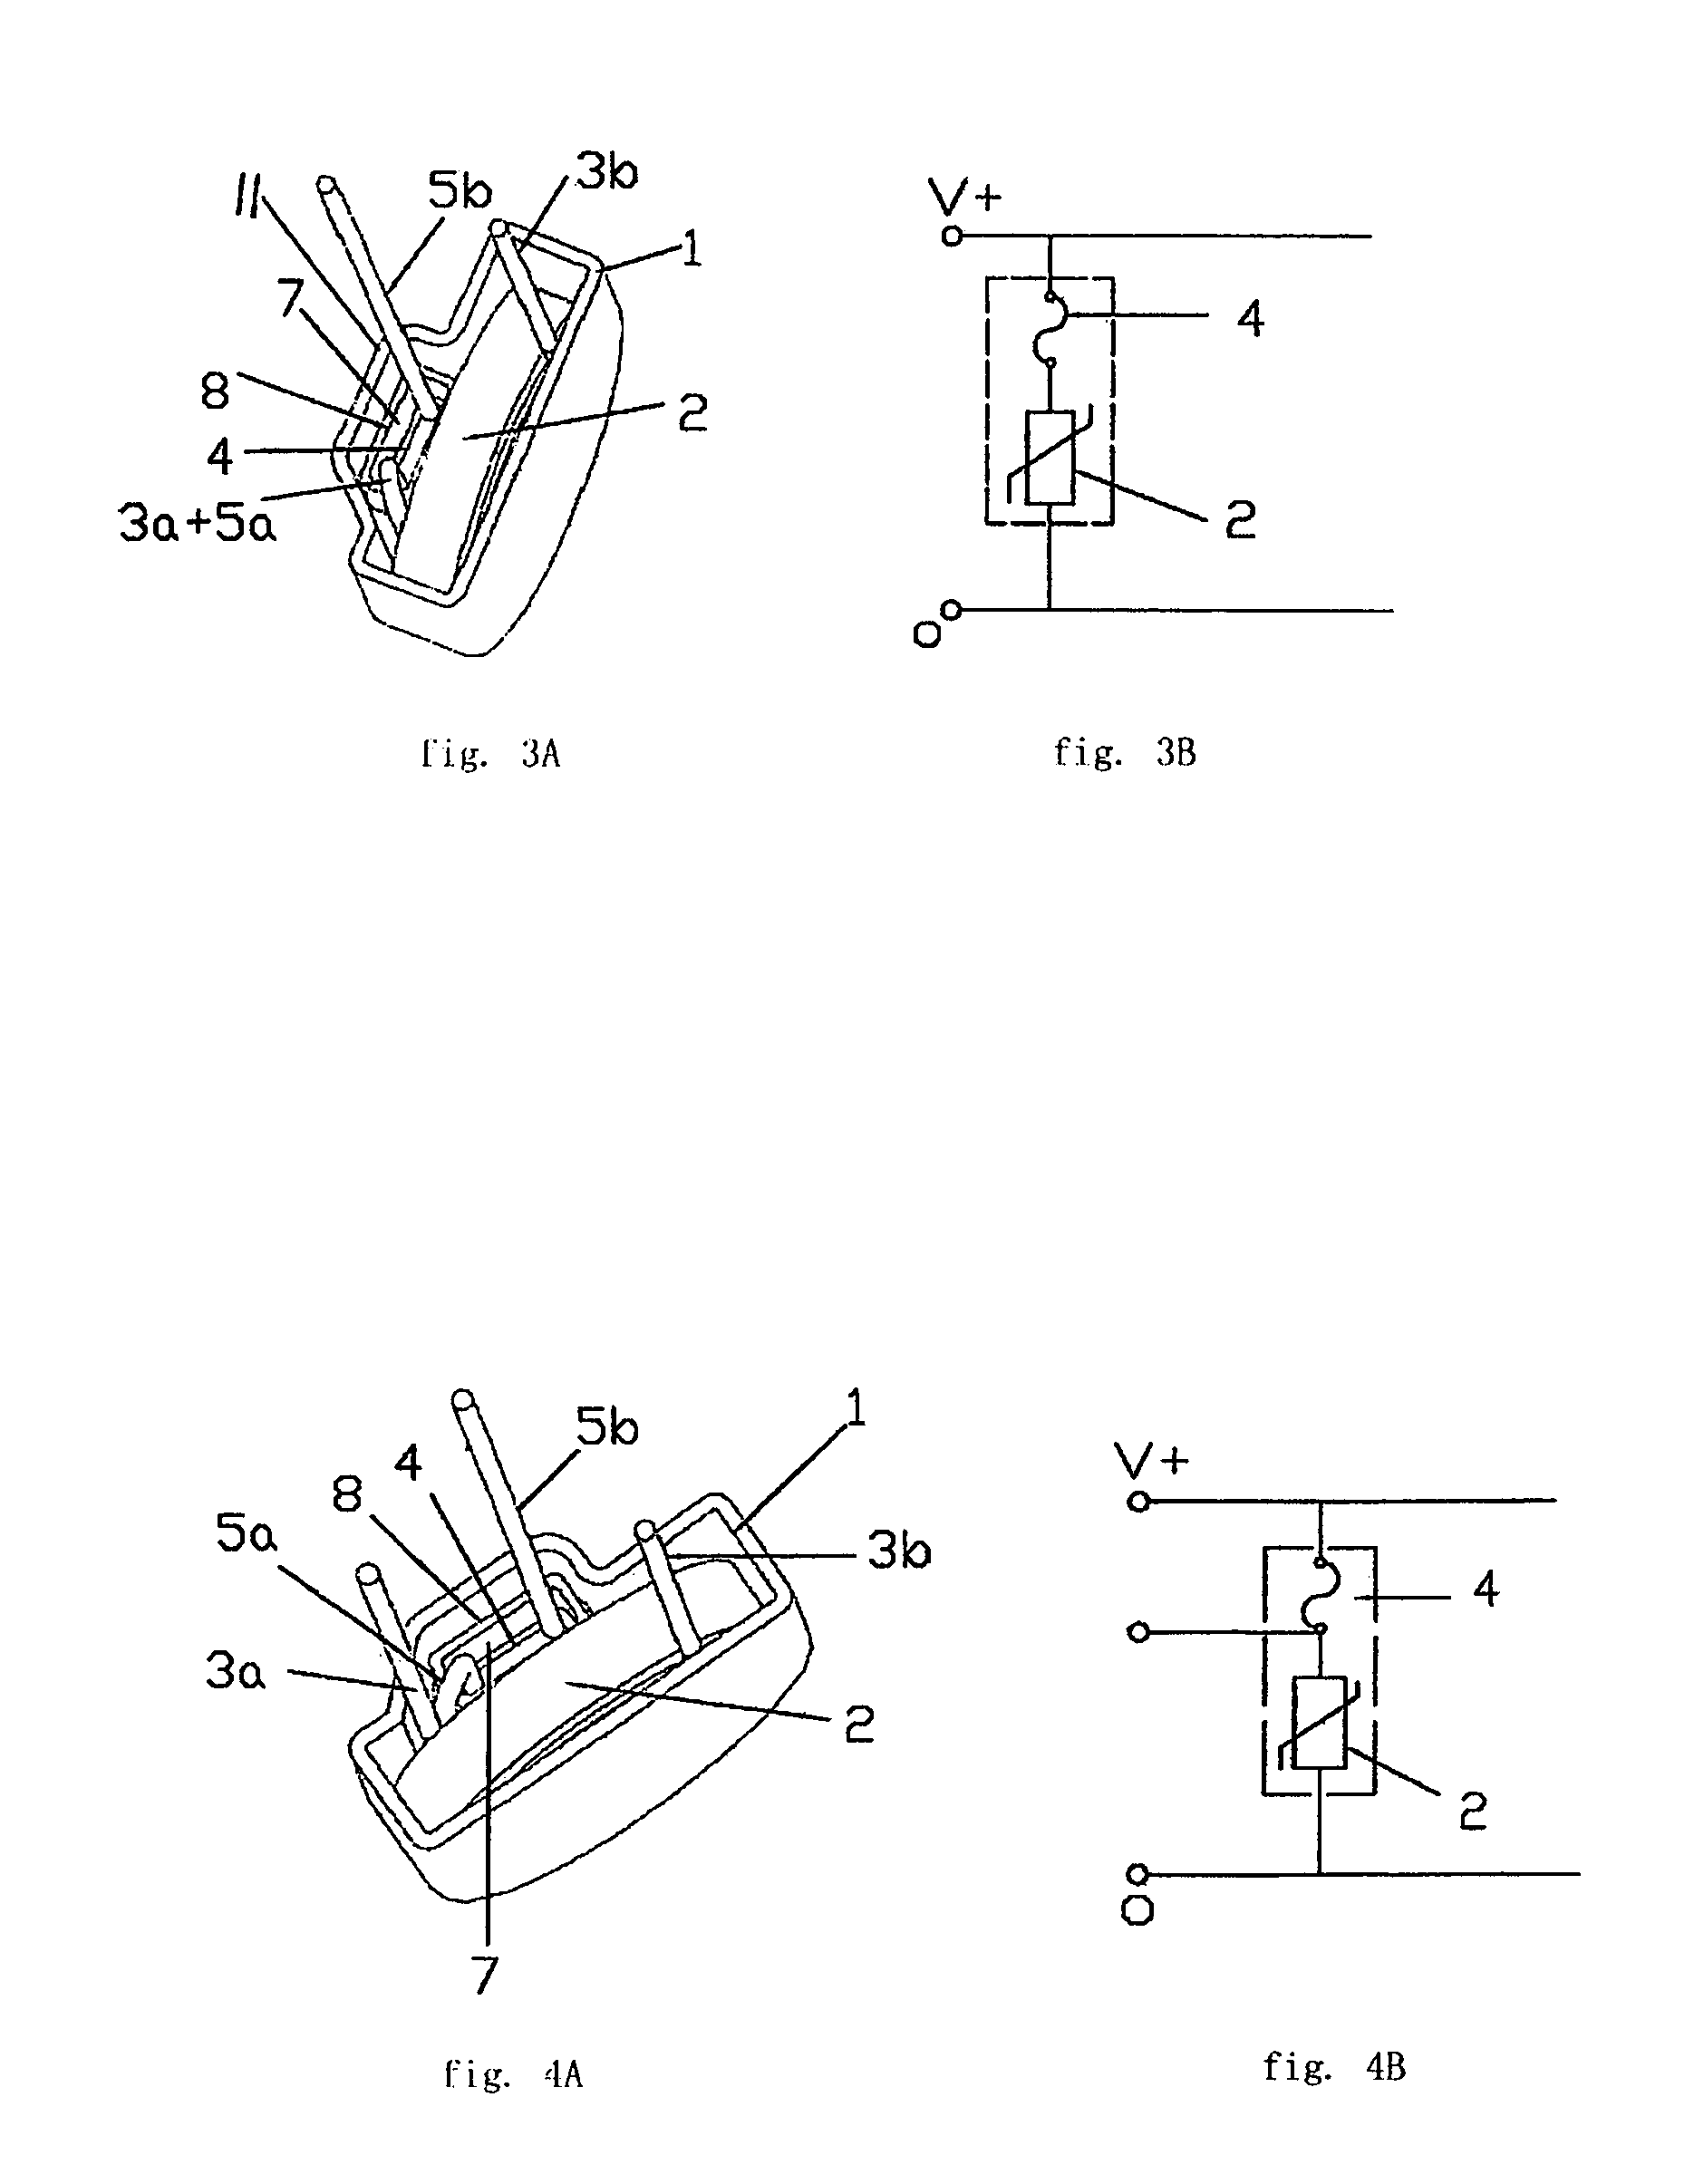 Metal oxide varistor with built-in alloy-type thermal fuse